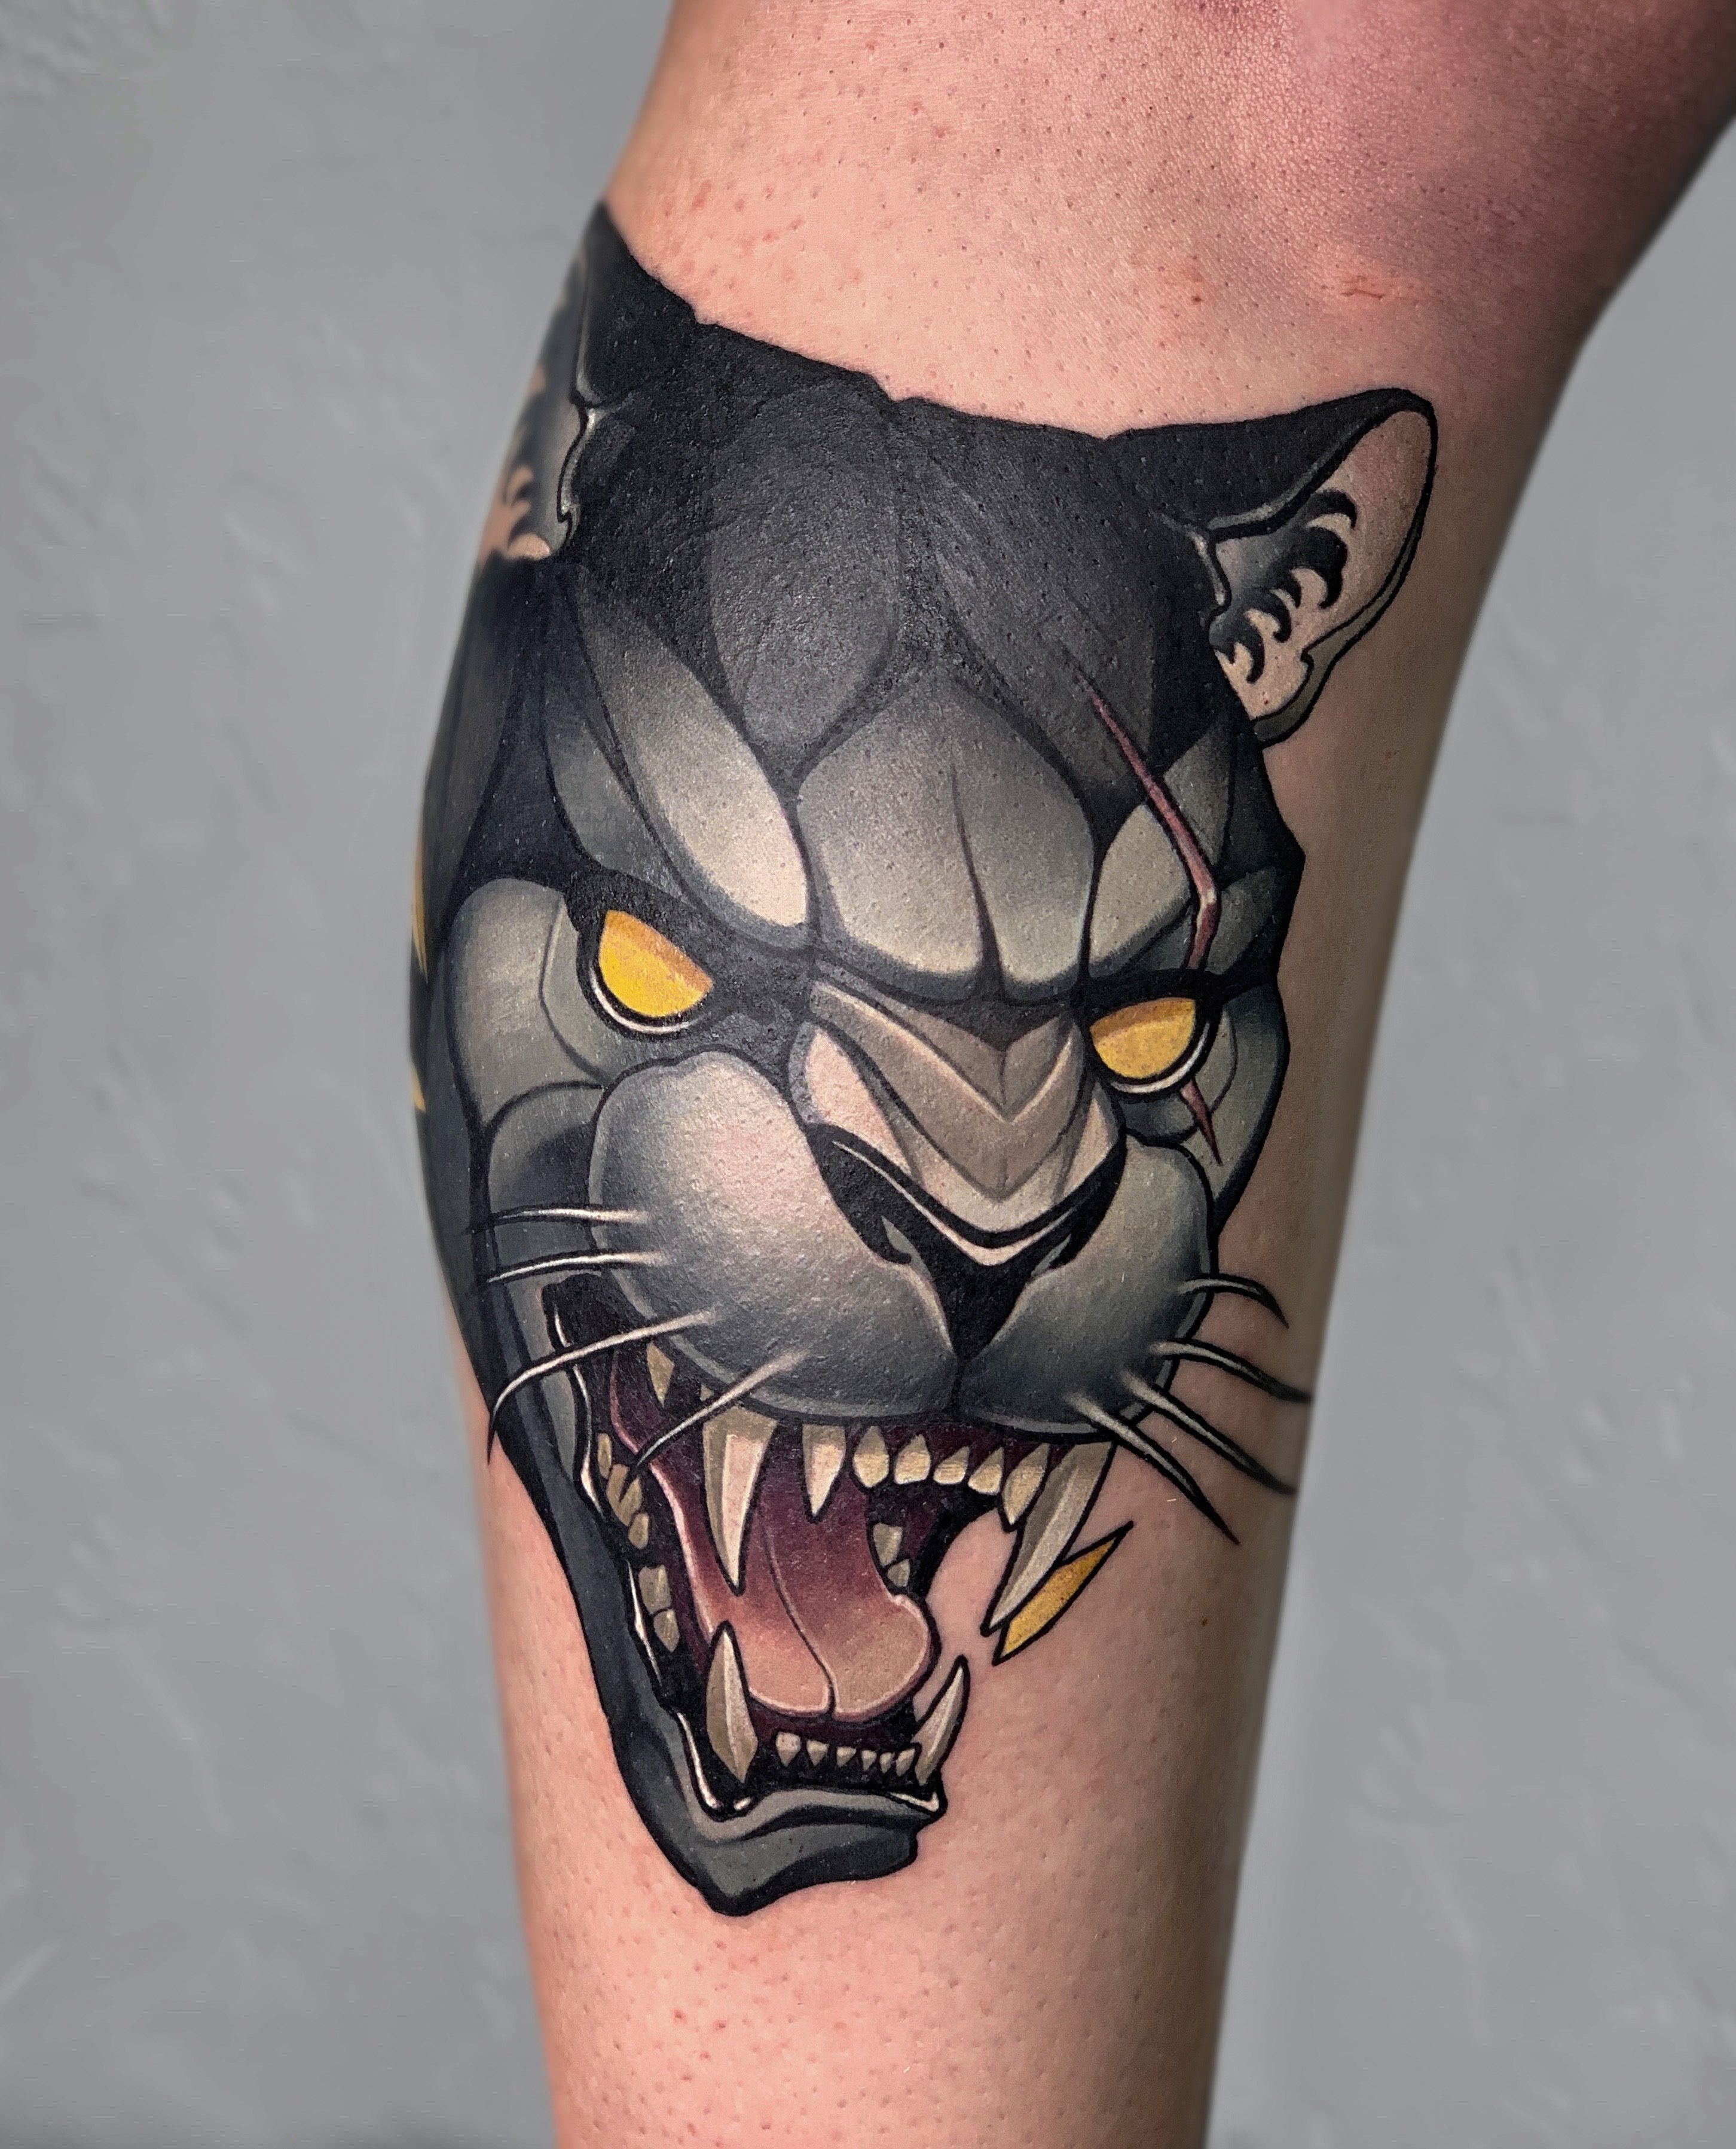 Black Panther head tattoo often symbolizes strength, courage, and  determination. the panther head is also a symbol of fierce protection a...  | Instagram